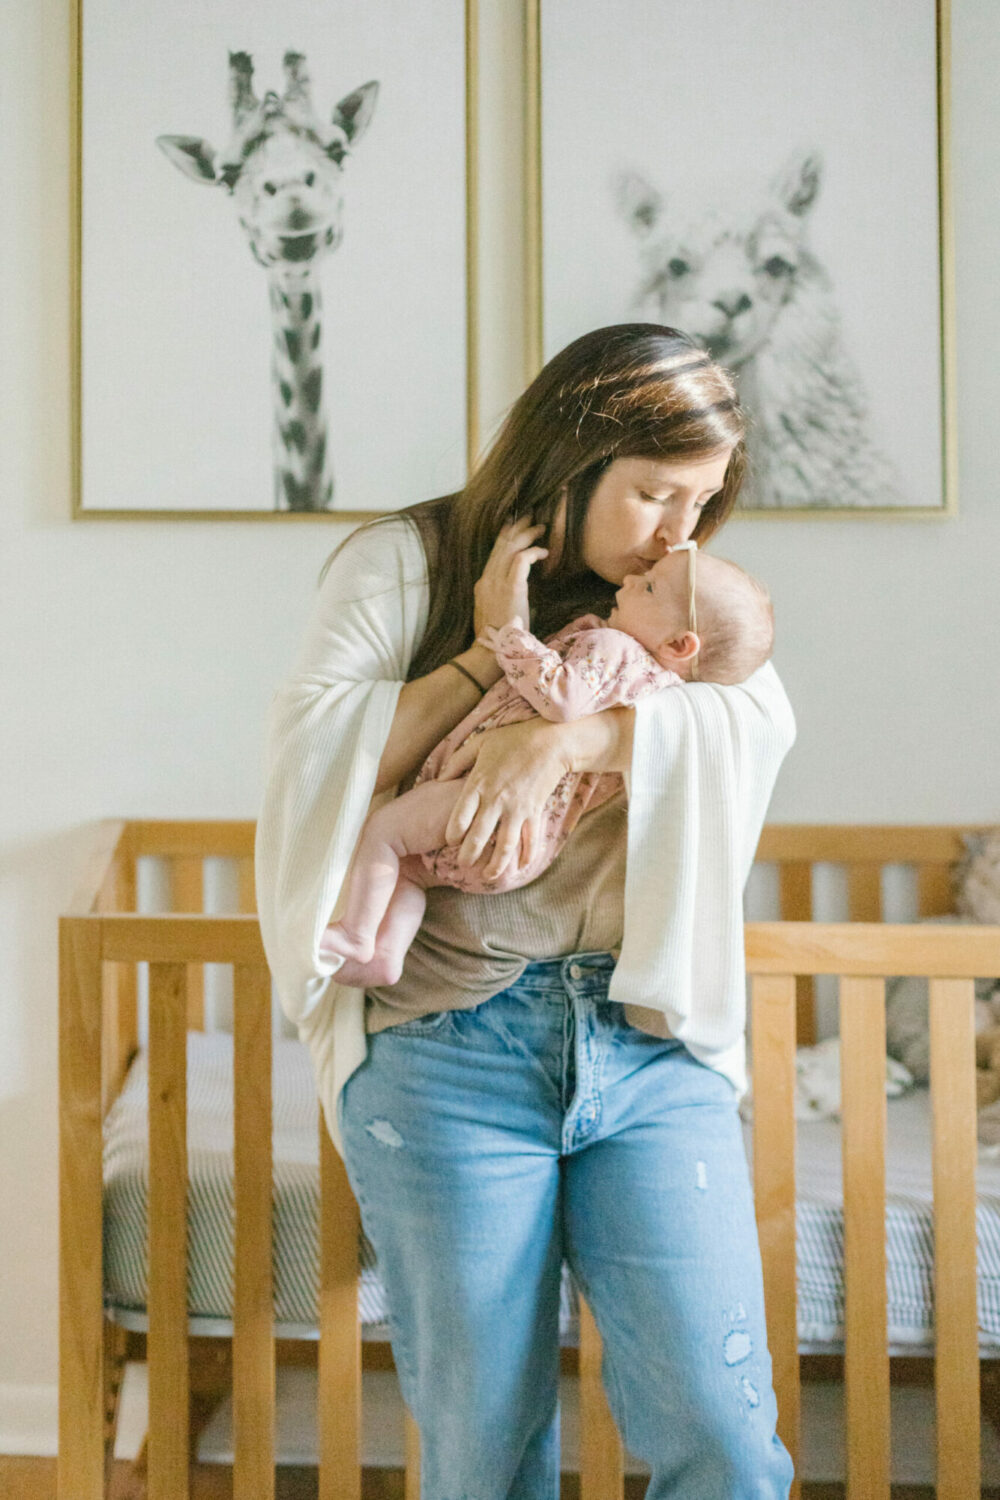 Tallahassee Photographer - Sarah Gray Photography warm newborn session at home in Tallahassee, Florida